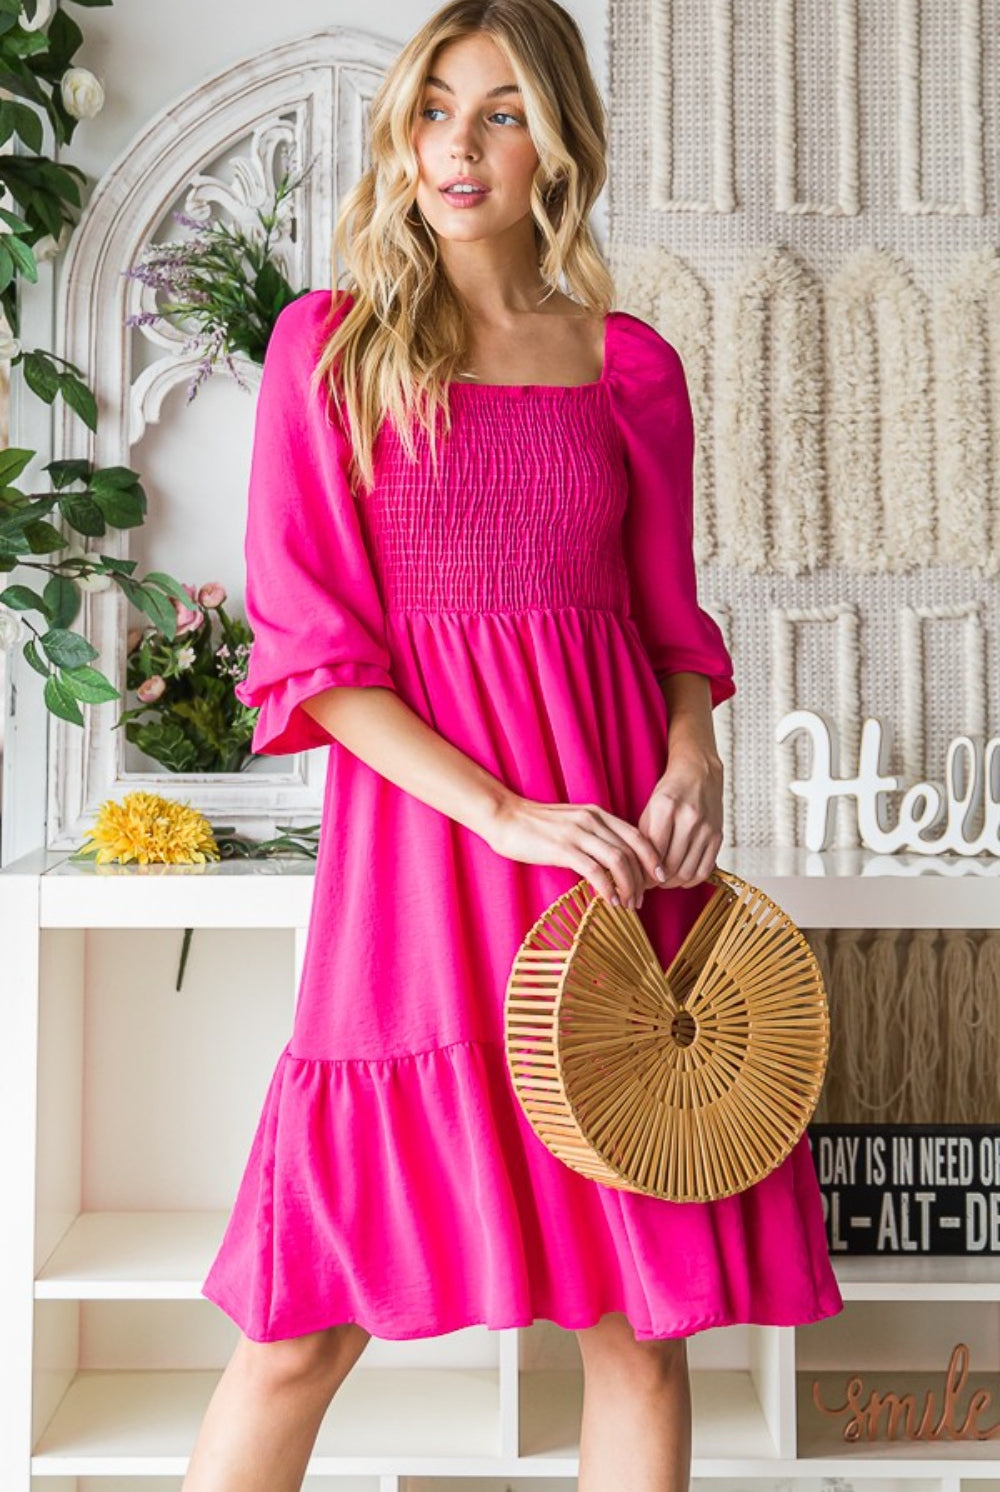 A stylish woman poses in a vibrant pink smocked ruffle hem dress, holding a trendy bamboo circle bag, creating an effervescent and fashion-forward summer outfit.